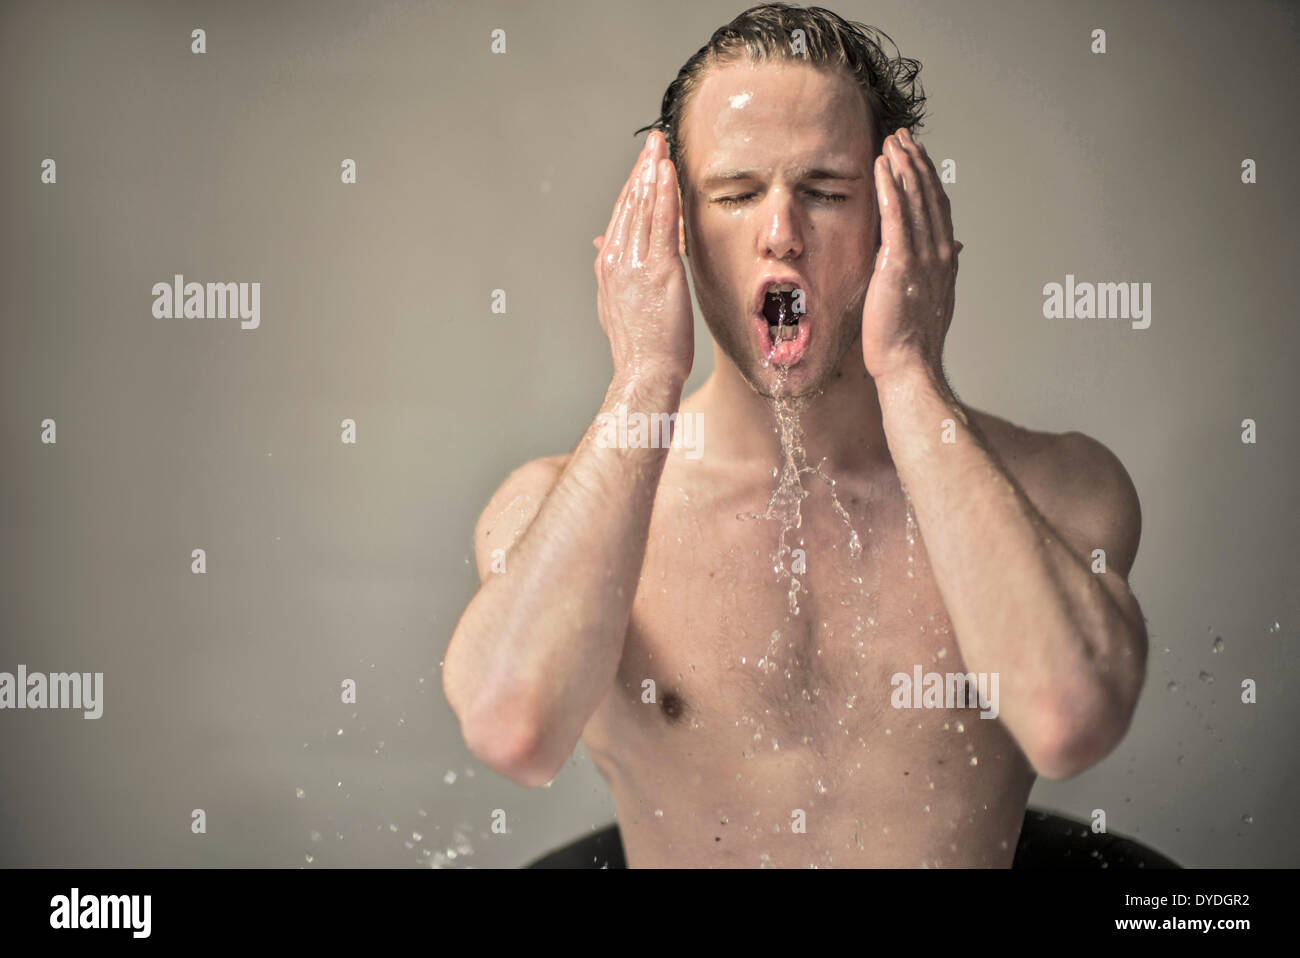 A beautiful young man splashing water on his face. Stock Photo